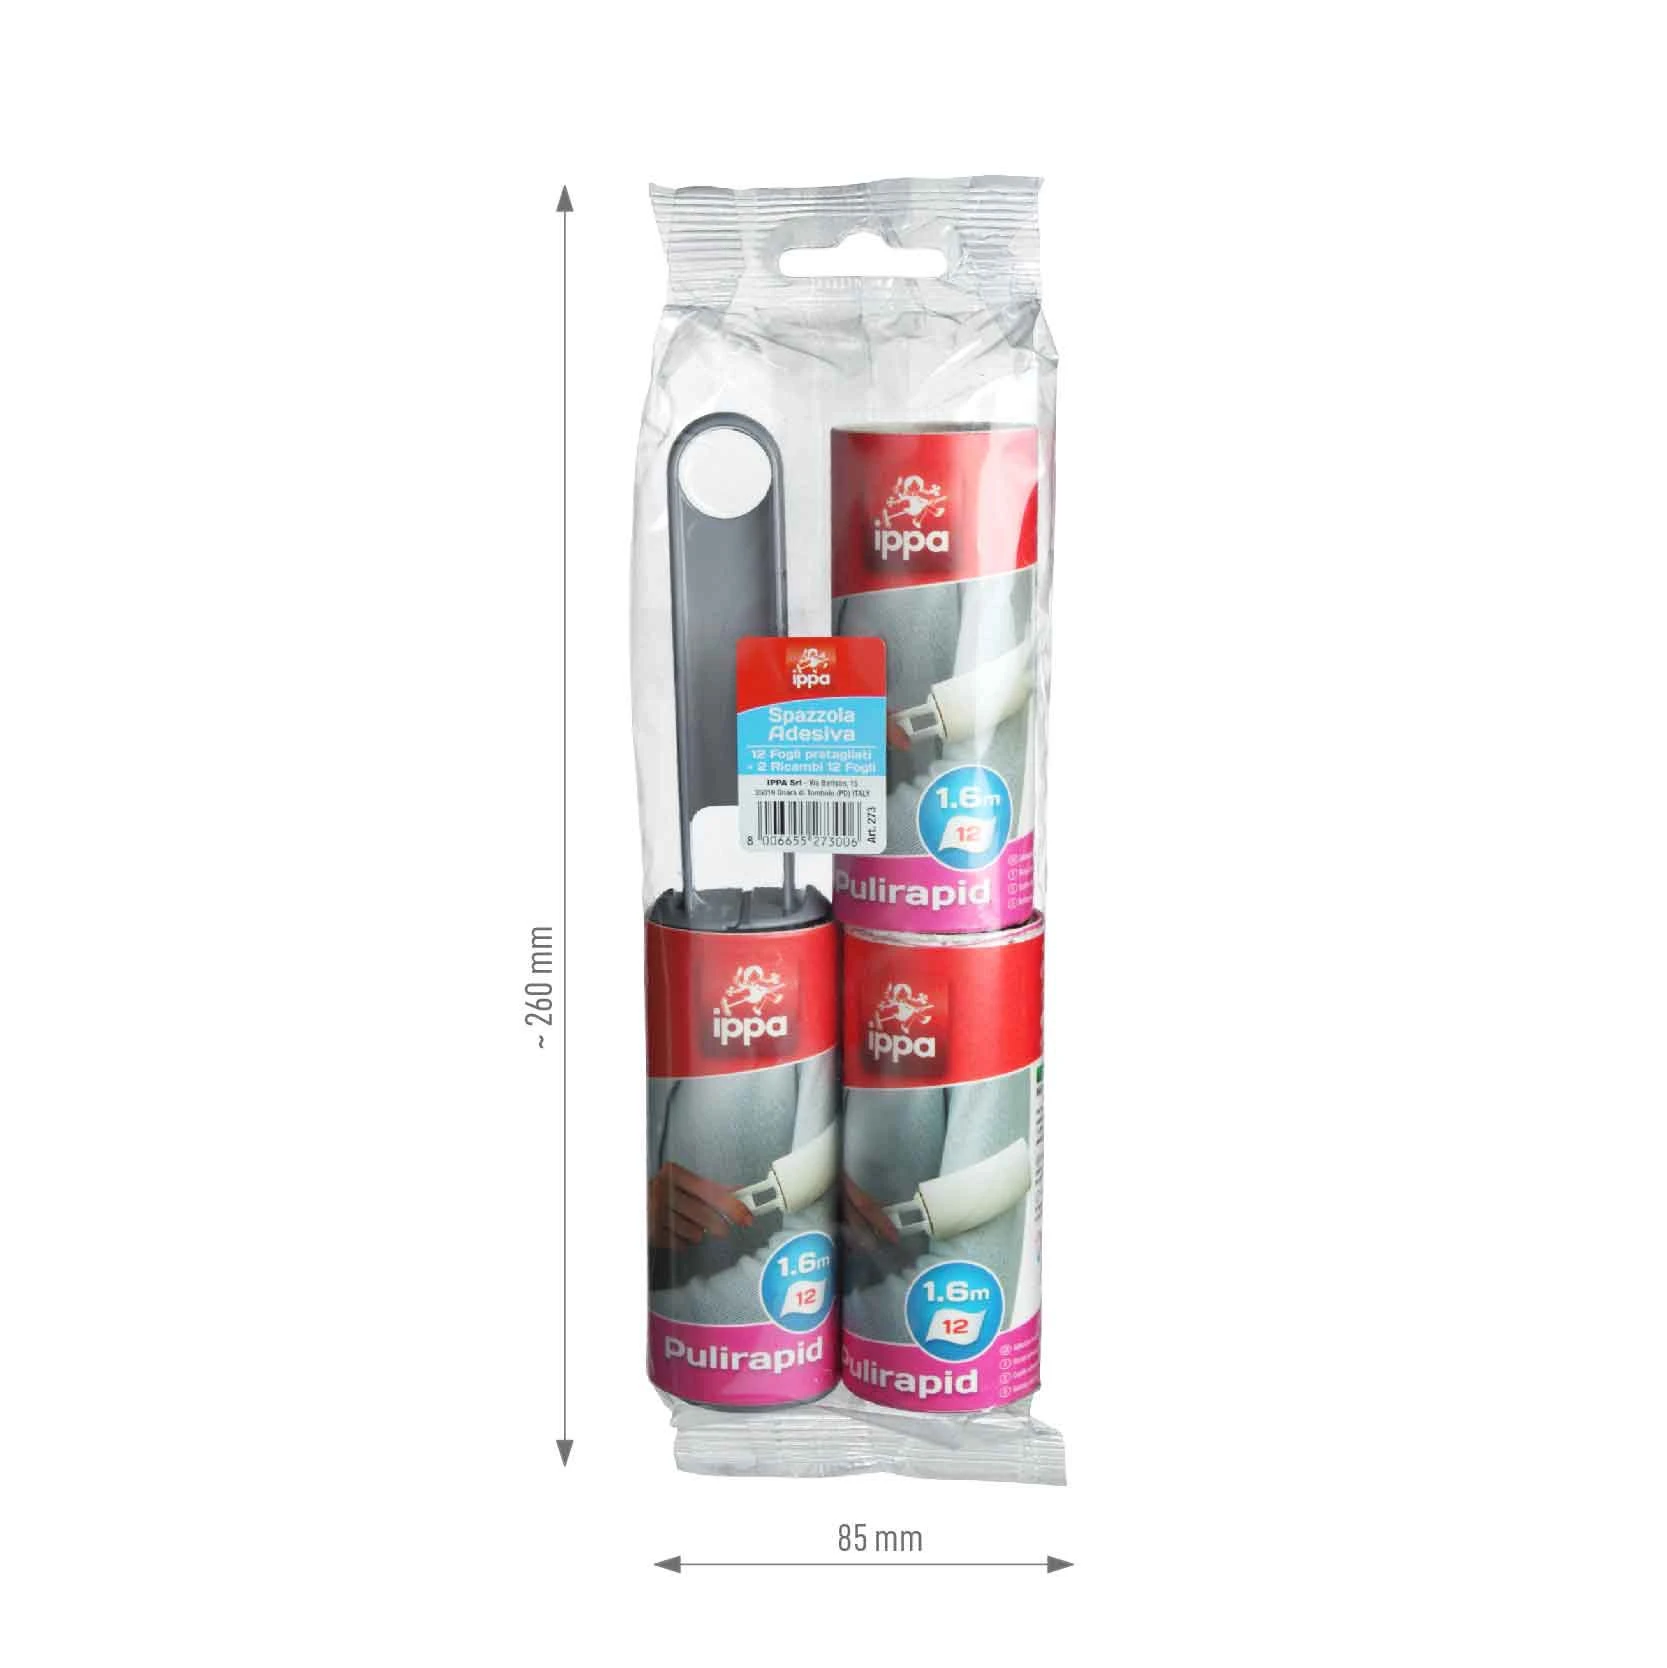 Lint roller Set with handle and 2 refills 1.6 meters of adhesive paper divided into 12 pre-cut sheets each roller Made in Italy